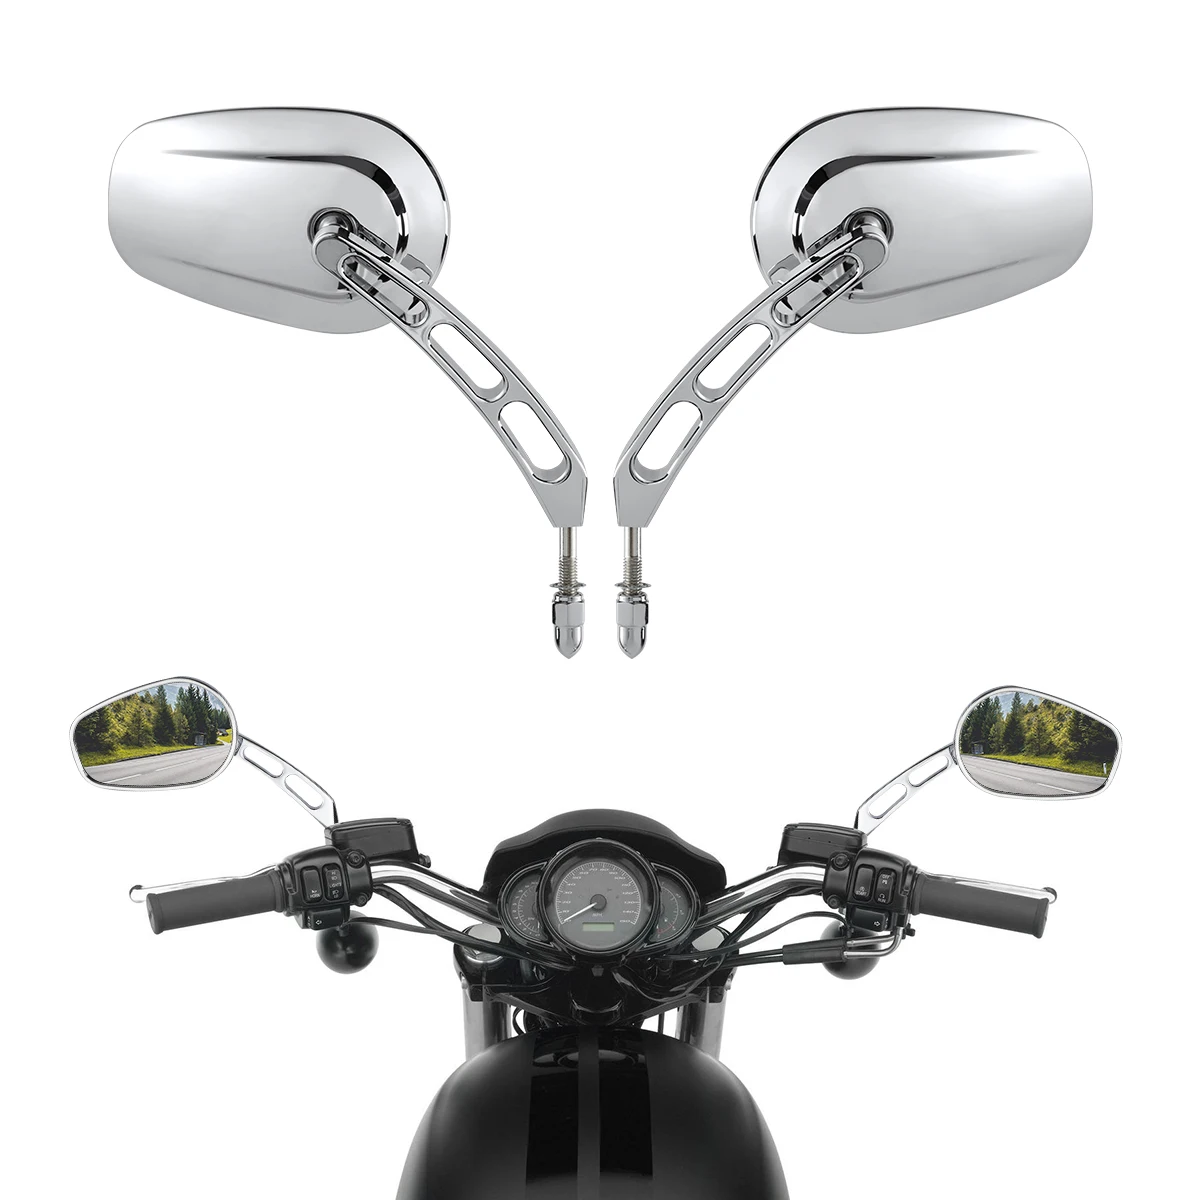 Chrome Motorcycle Mirrors For Harley Davidson Road King Softail Sportster Dyna A